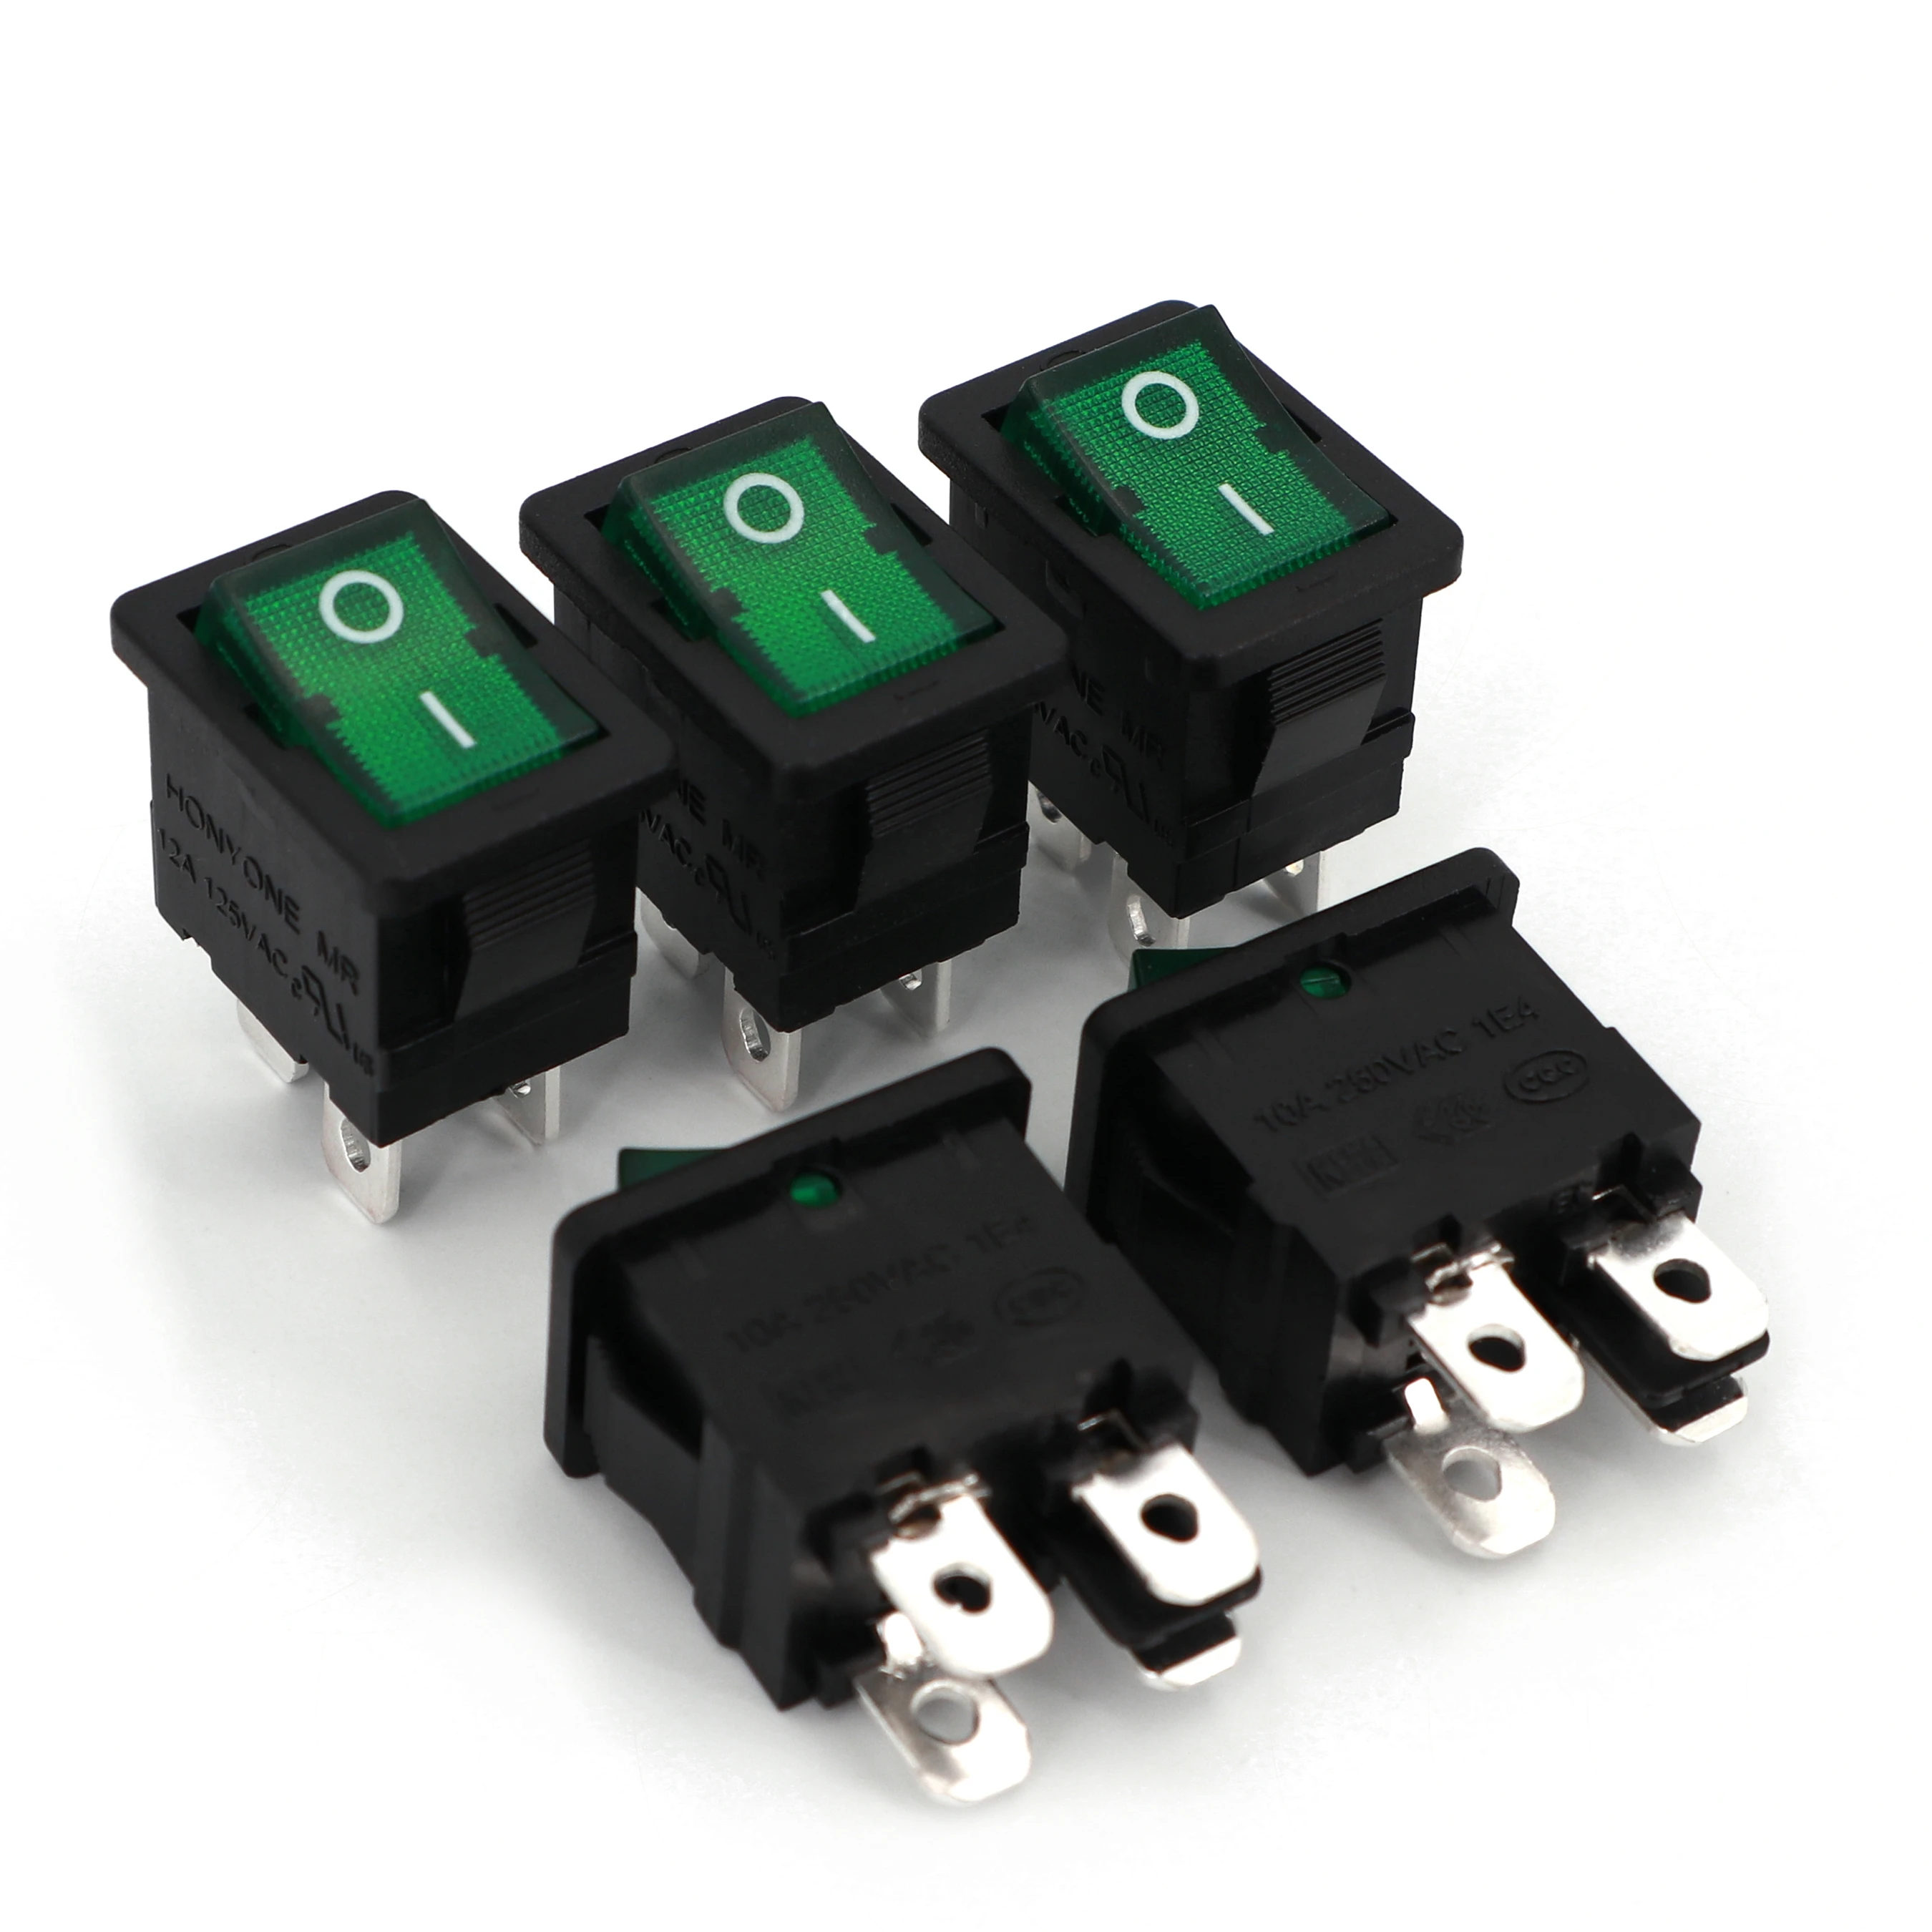 

5Pcs Green With Lamp 21*15mm 4Pin ON-OFF Maintained 2 Position DPST Mini Rocker Switch 12A/125VAC